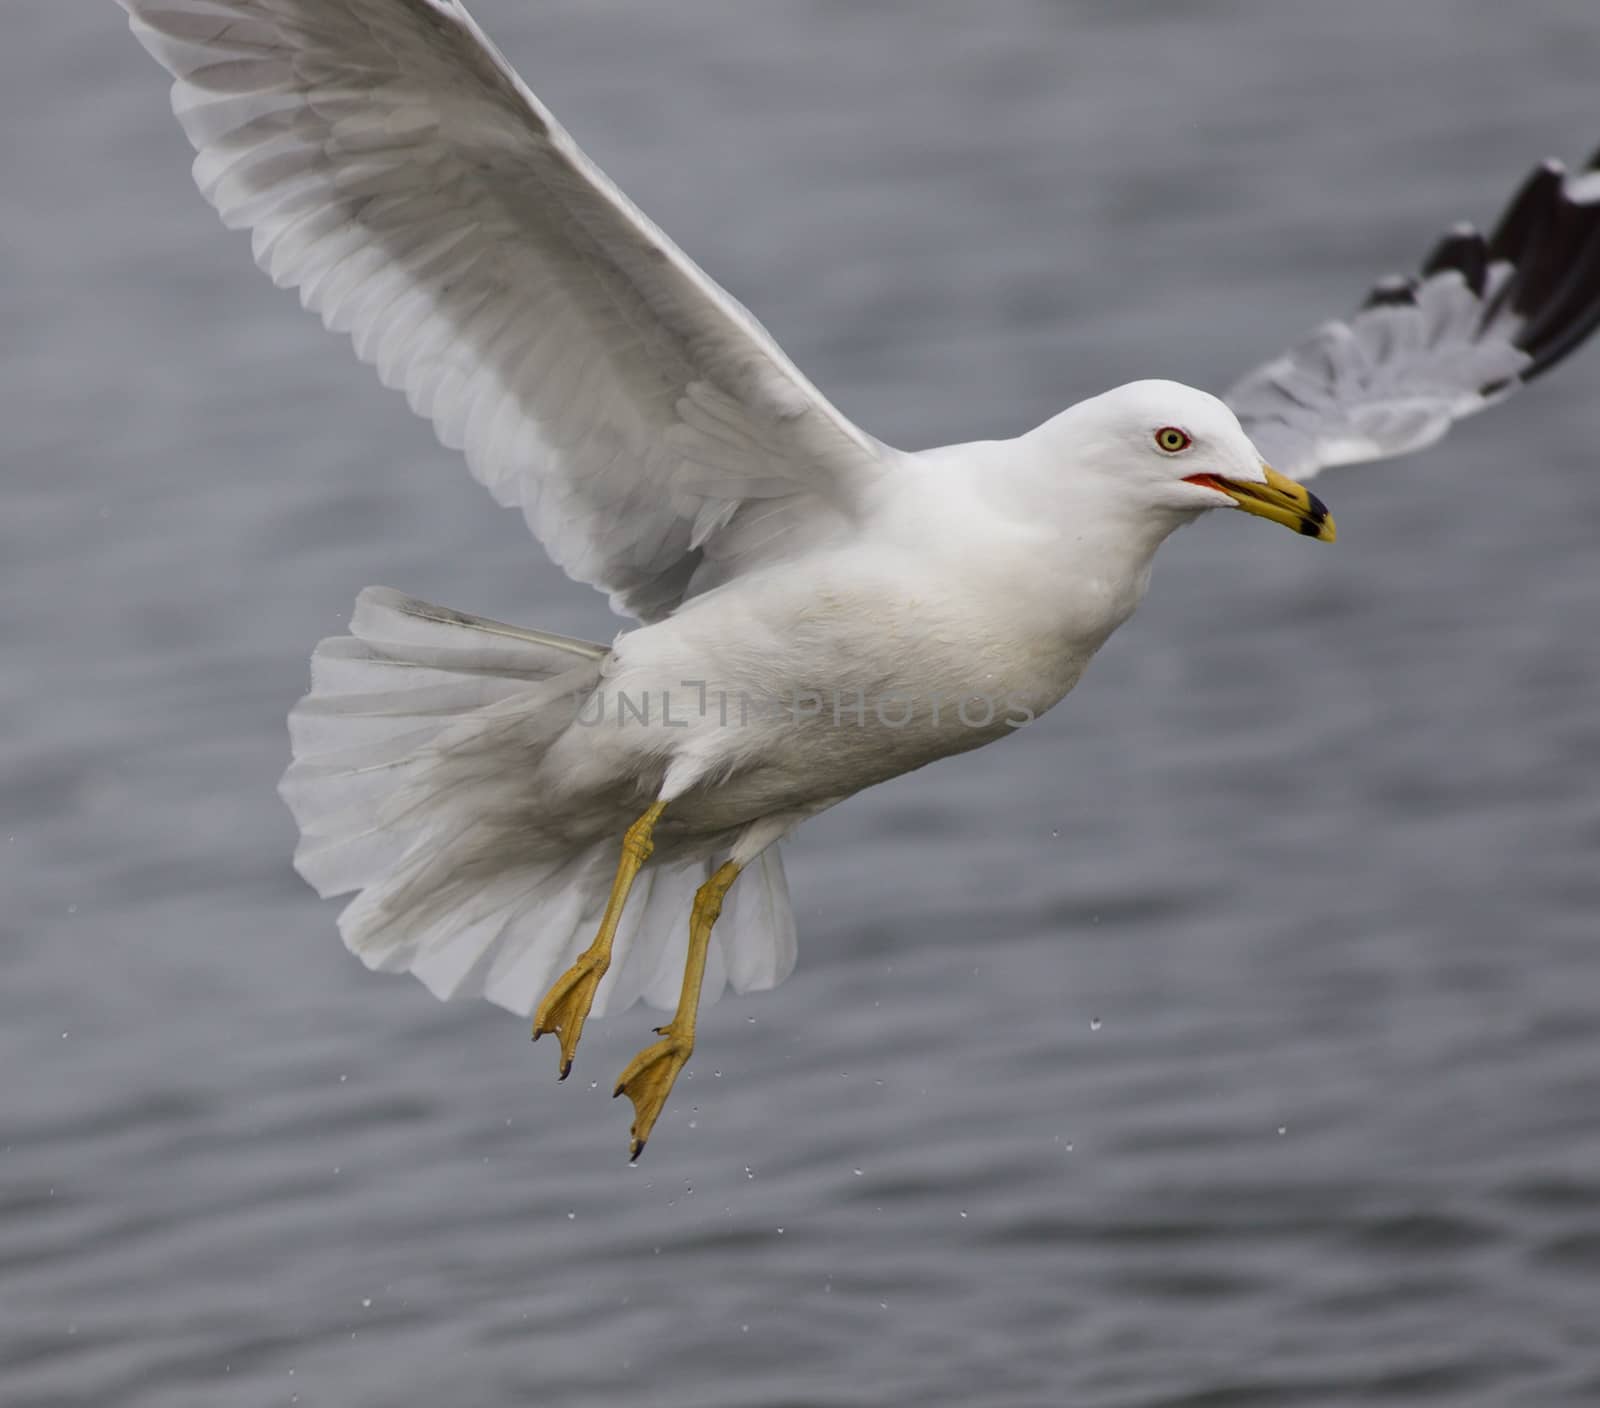 Beautiful close photo of a gull with the wings opened